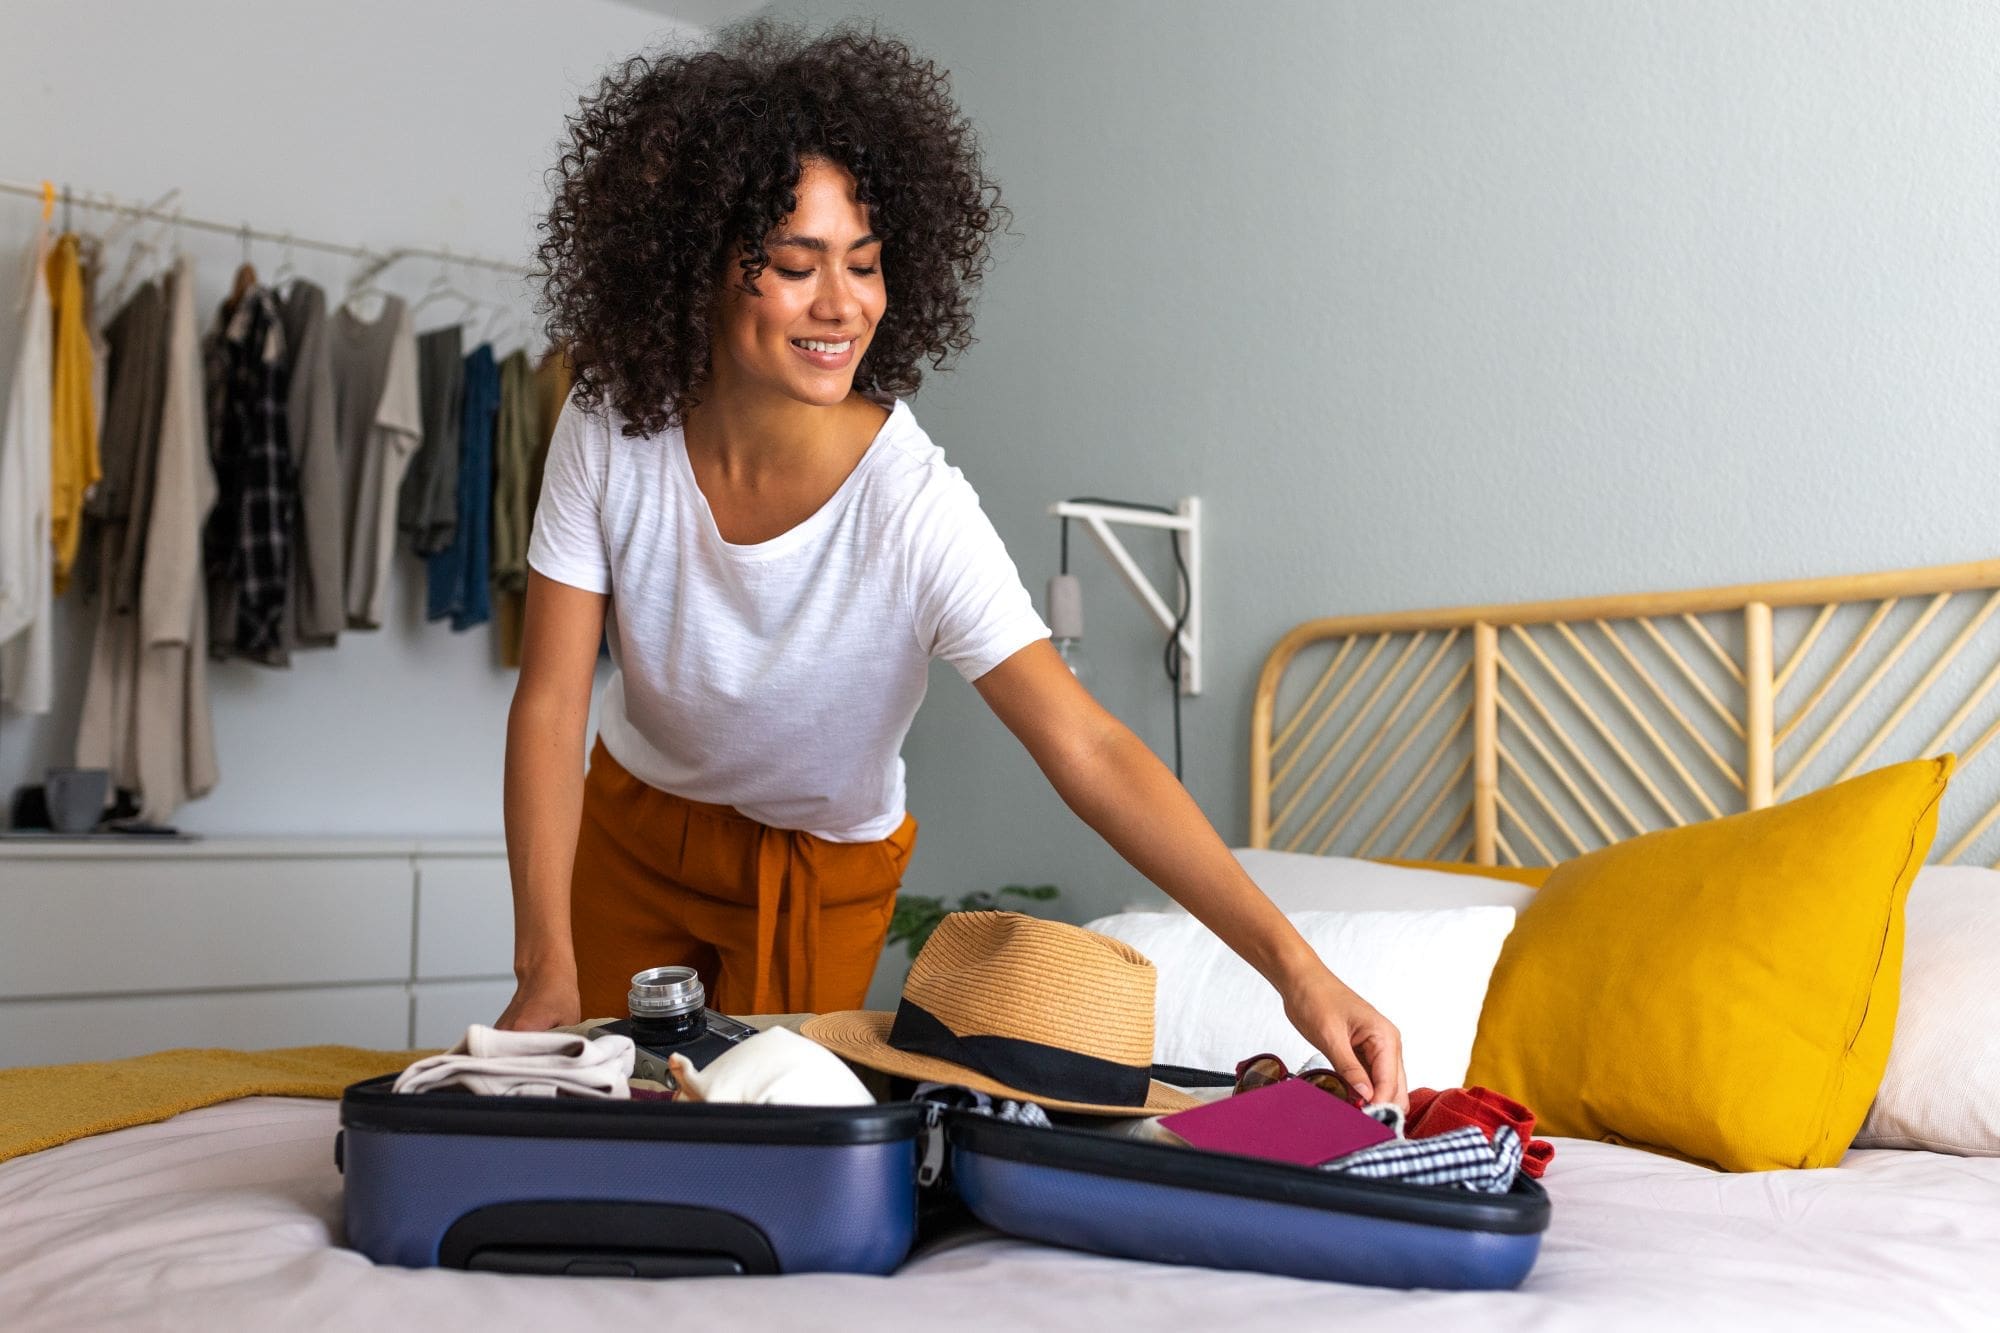 The Ultimate Buying Guide for Travel Suitcase